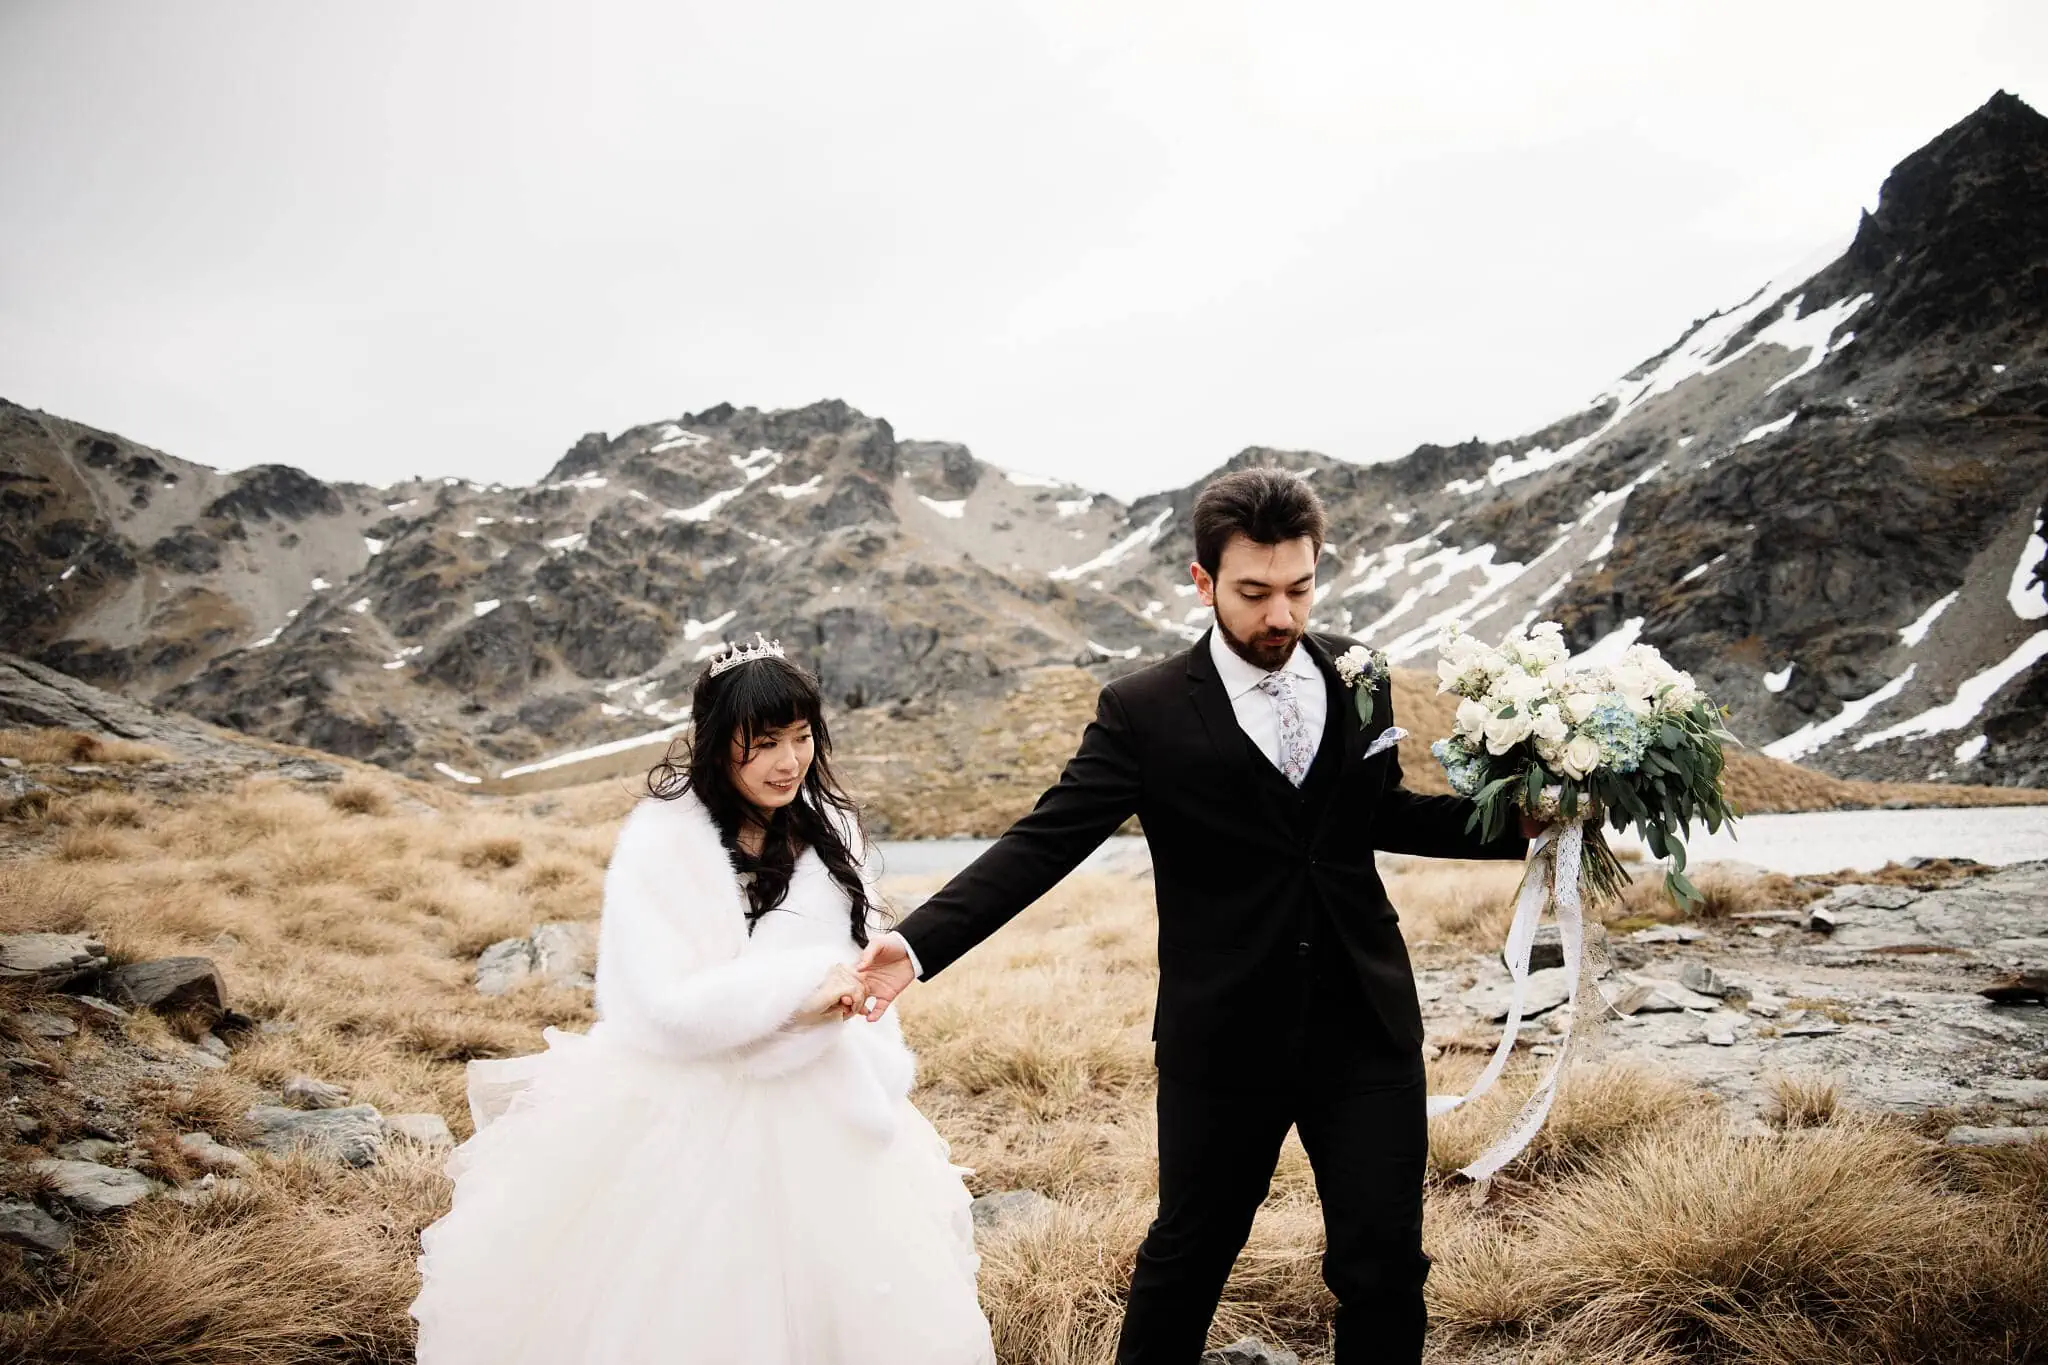 Carlos and Wanzhu have an intimate elopement wedding, holding hands in the mountains at Cecil Peak.